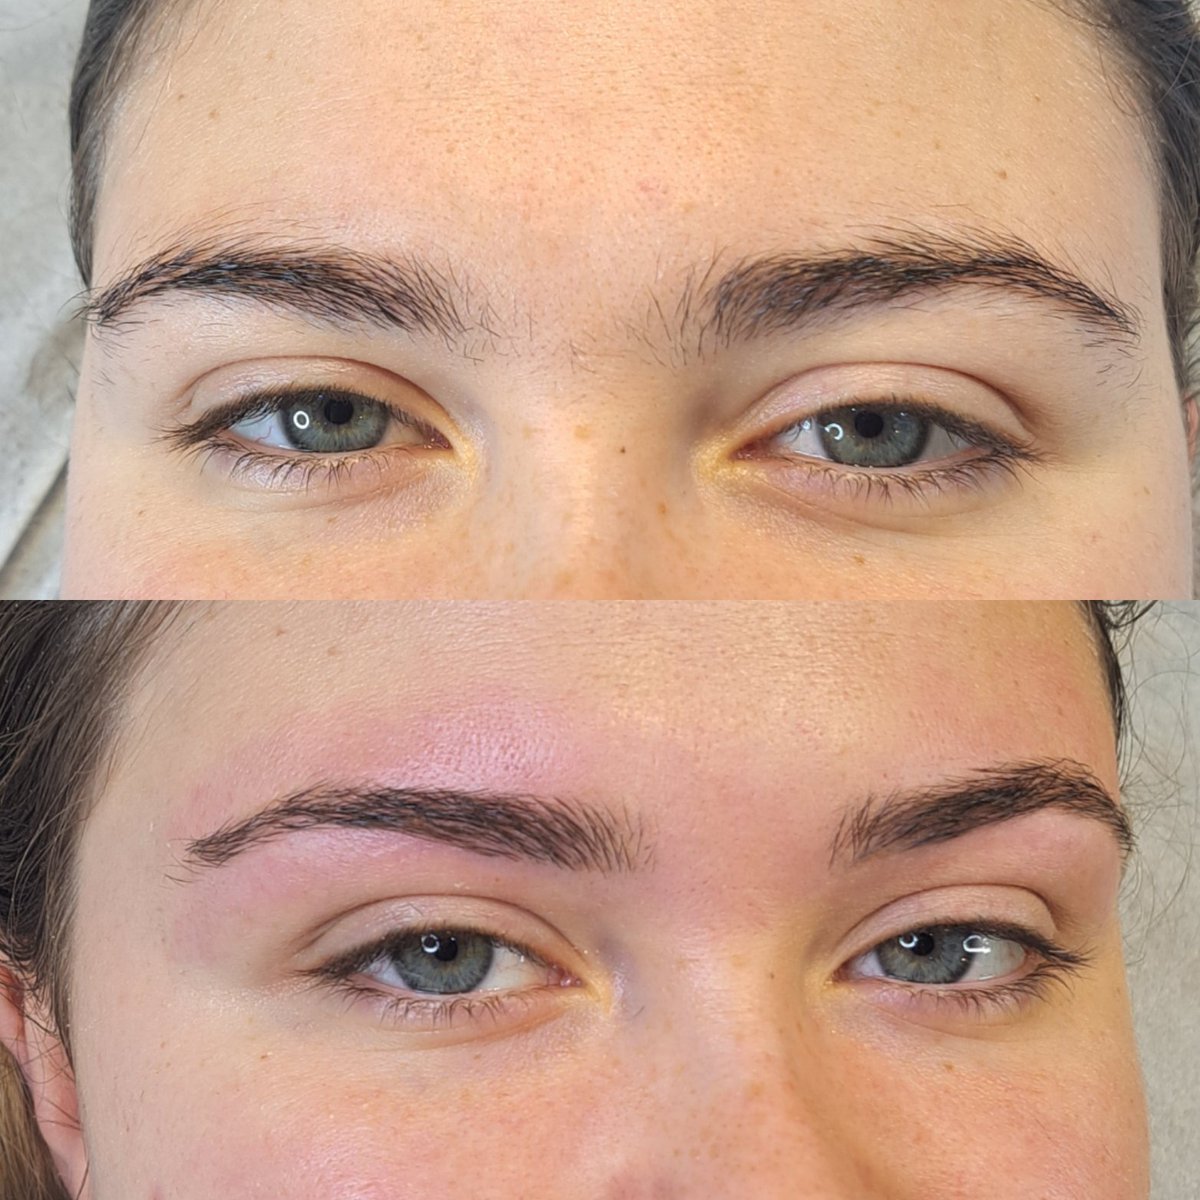 There are various hair removal options available at Beautalis, depending on a client's needs. These include Lycon hot wax, strip wax, threading, tweezing and HD Brows.

#brows #browwax #hotwax #lyconwax #lyconwax #lyconhotwaxBrighton #lyconhotwehove #beautysalon  #browthreading